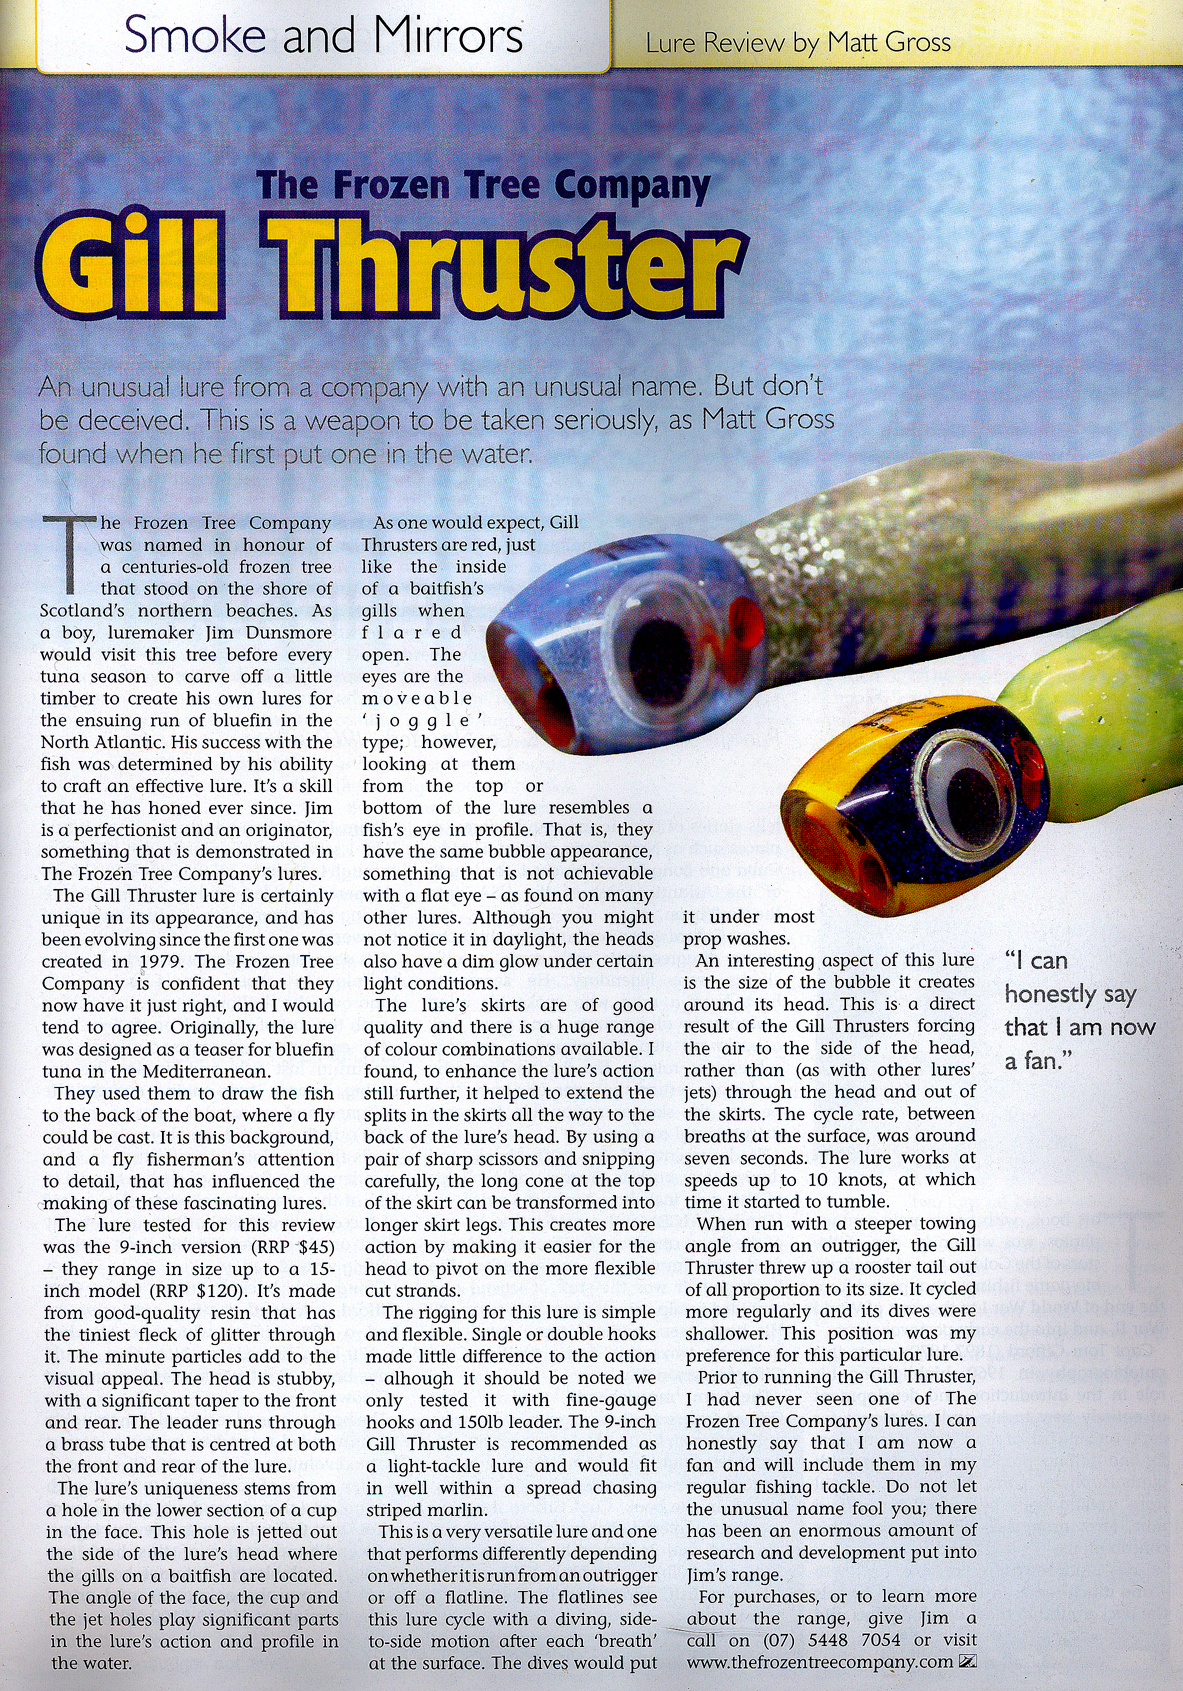 Smoke and Mirrors - Lure Review by Matt Gross - The Gill Thrusters